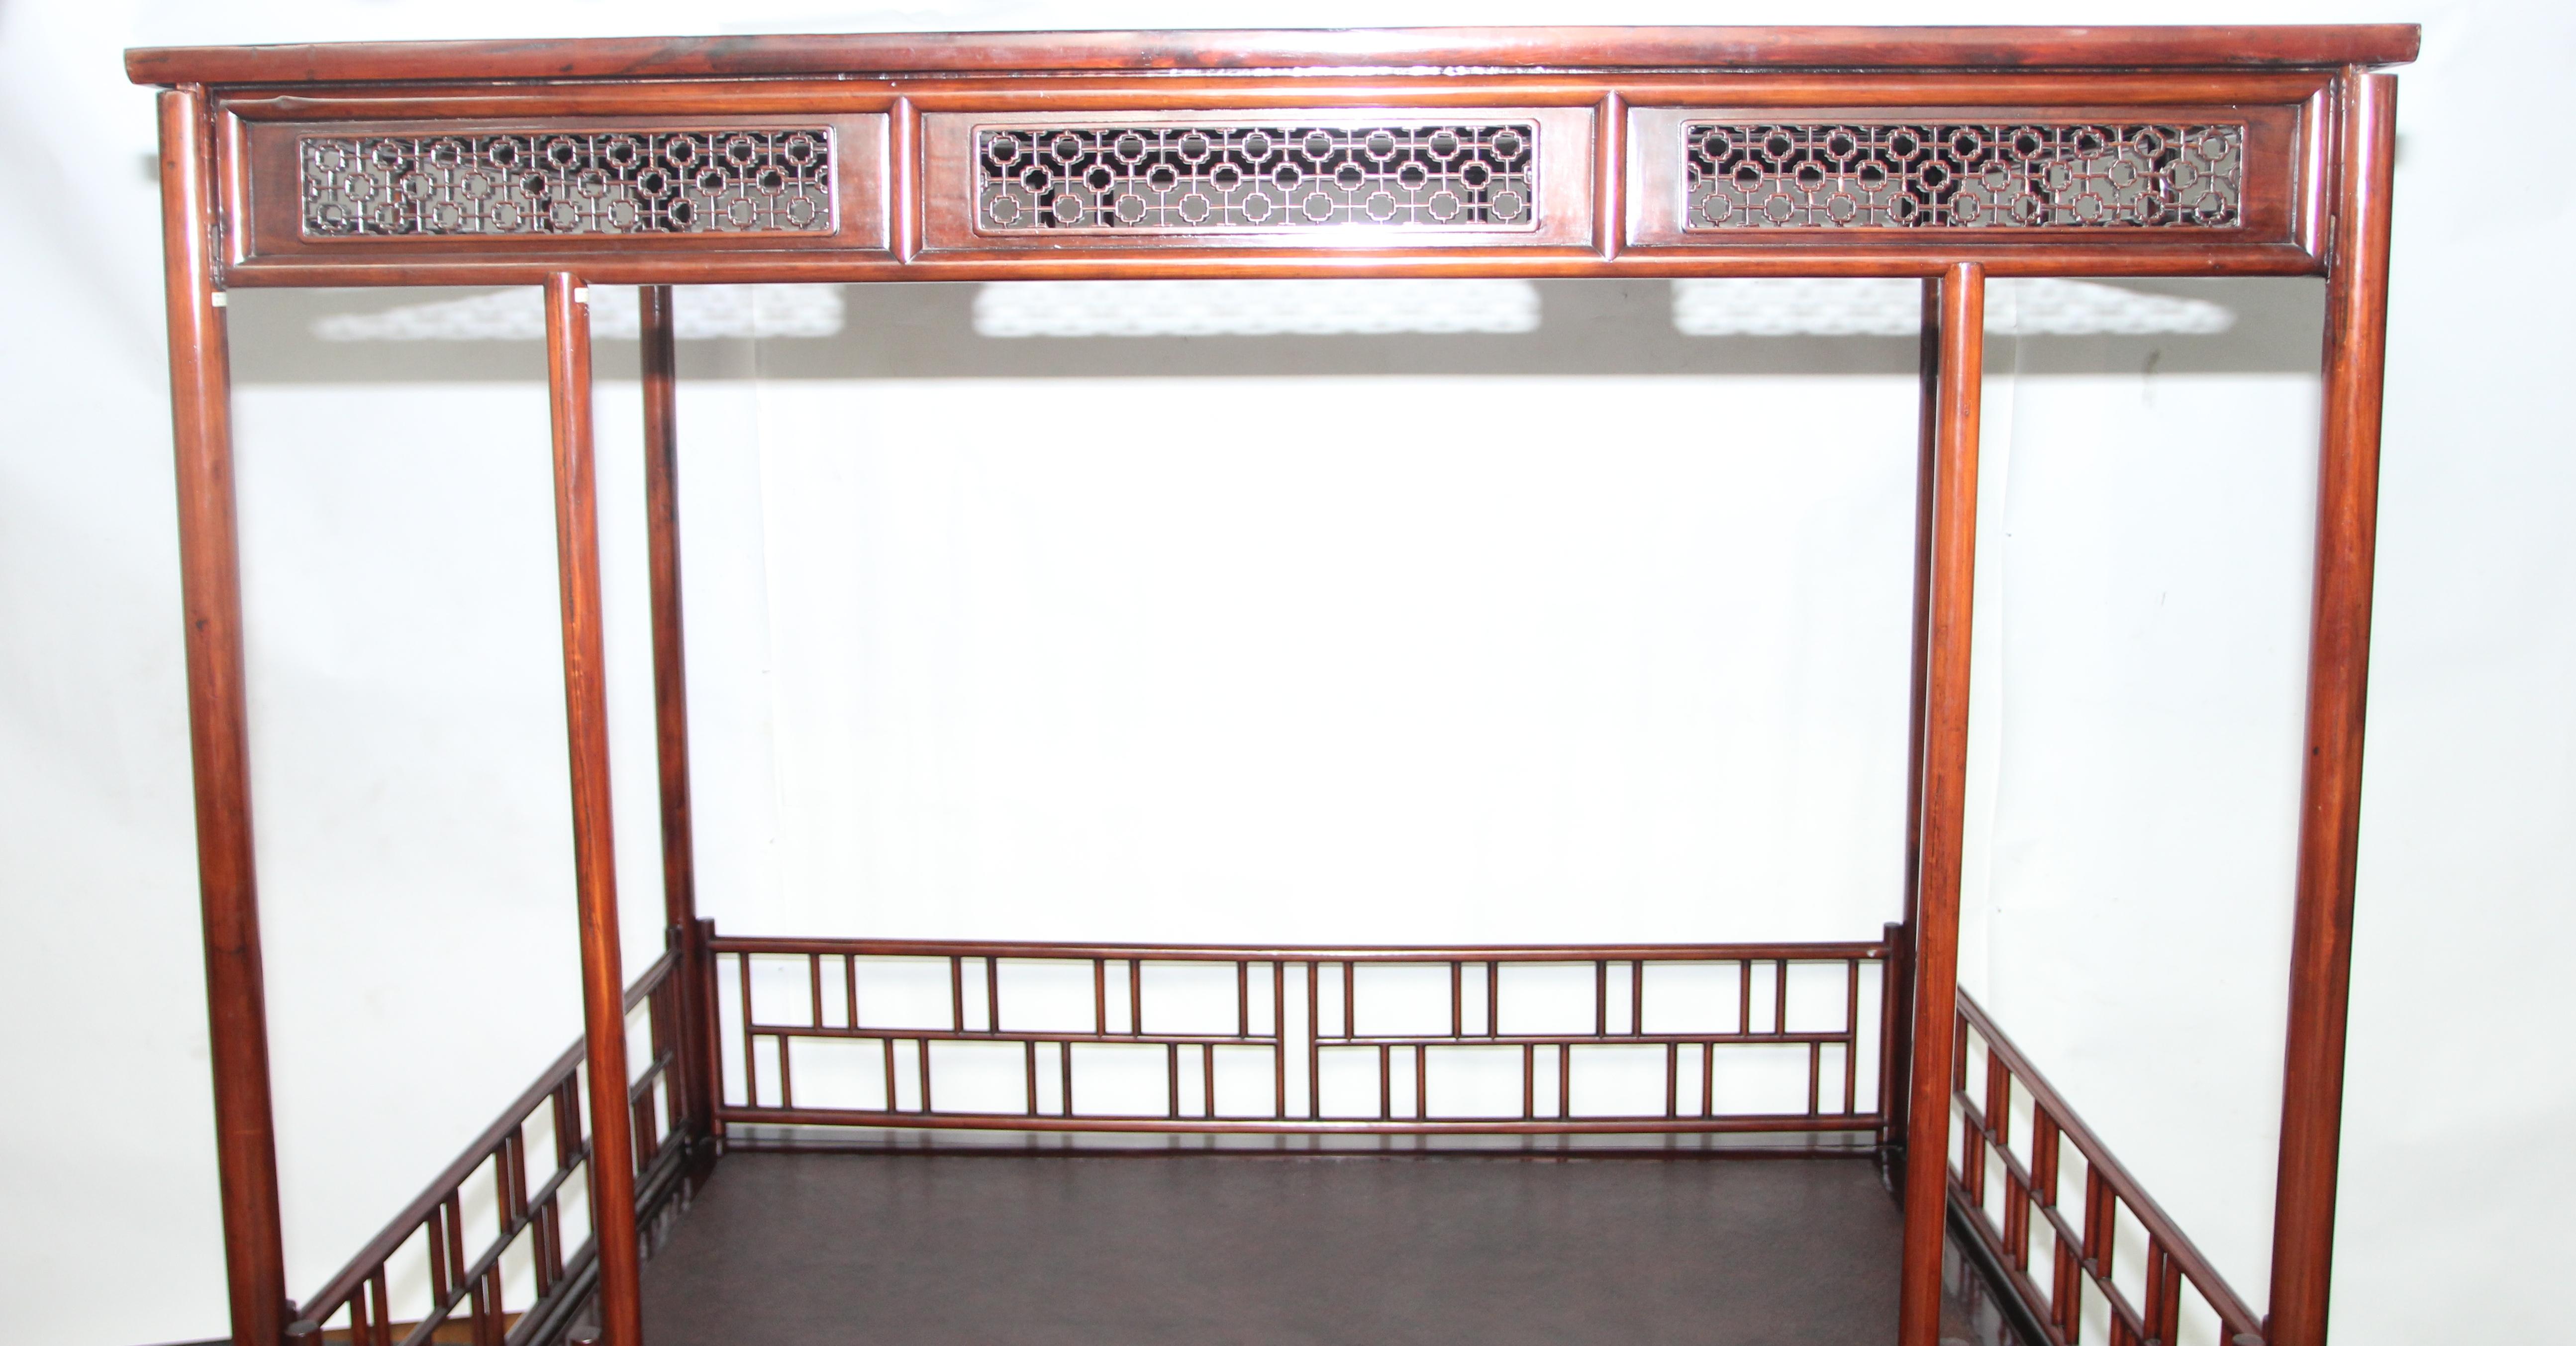 Fine six-posted canopy bed. 
The bed base with a rounded-front edged frame and a caned top, supported on circular-sectioned legs decorated with straight stretchers and vertical struts, the six posts braced on the back and sides by railings of